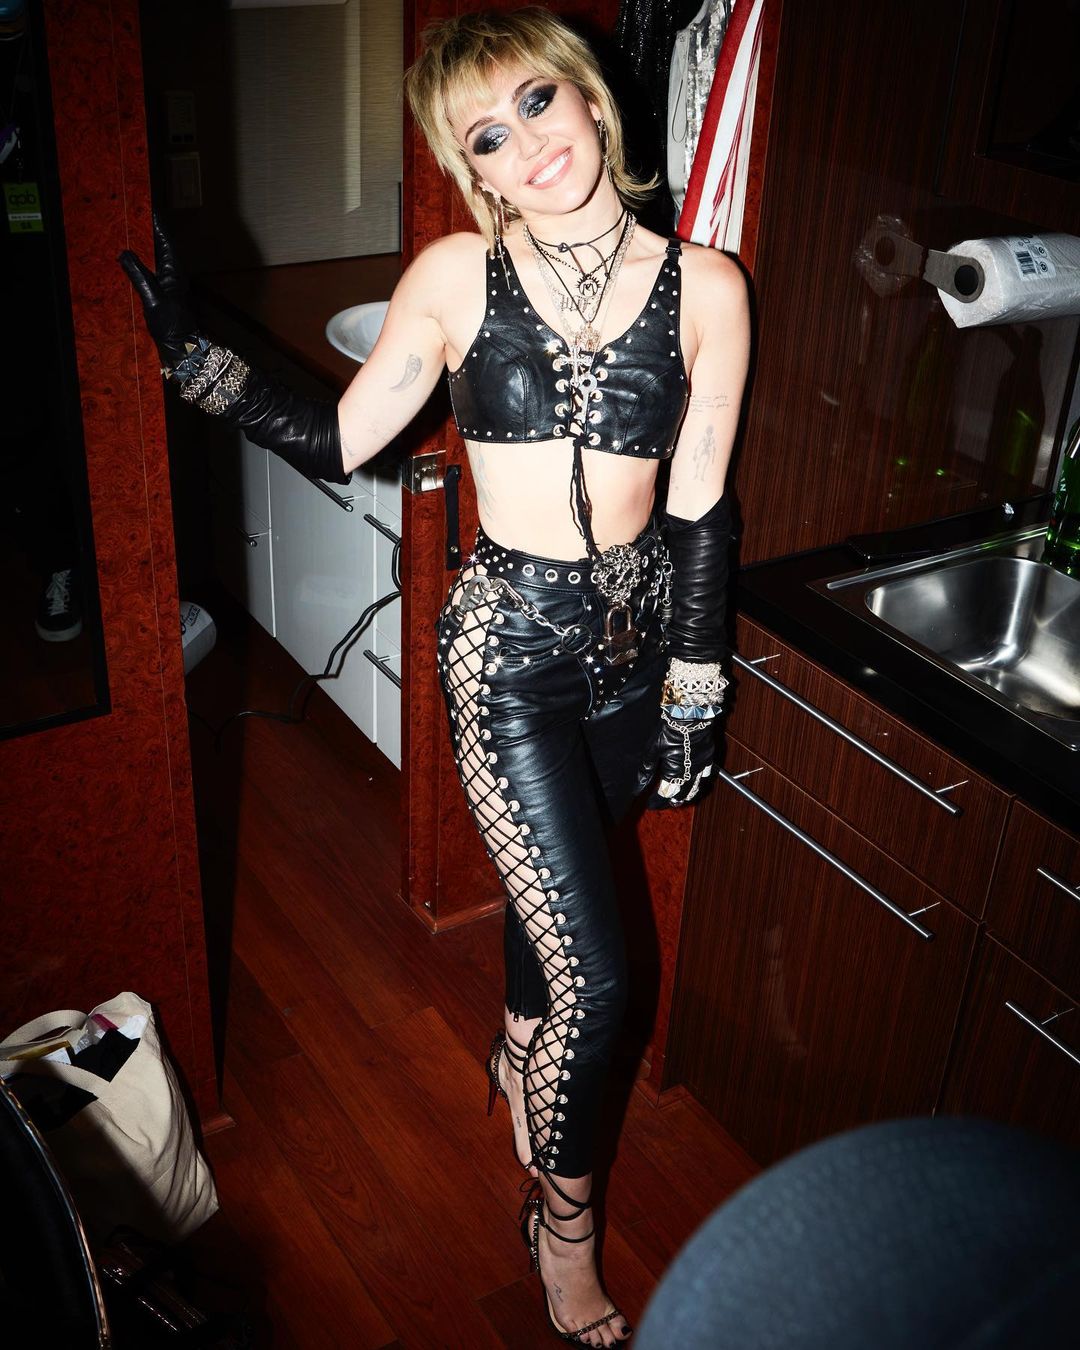 Photo n°3 : Miley Cyrus formation pour son tailgate party!